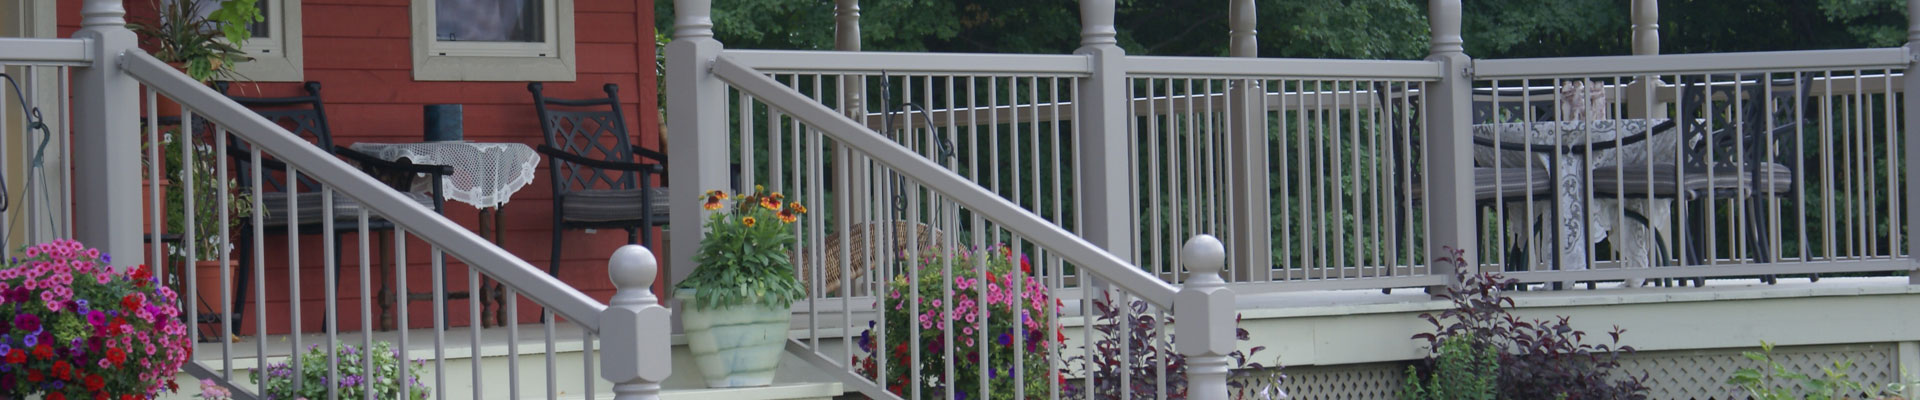 beautiful hand railing on a porch